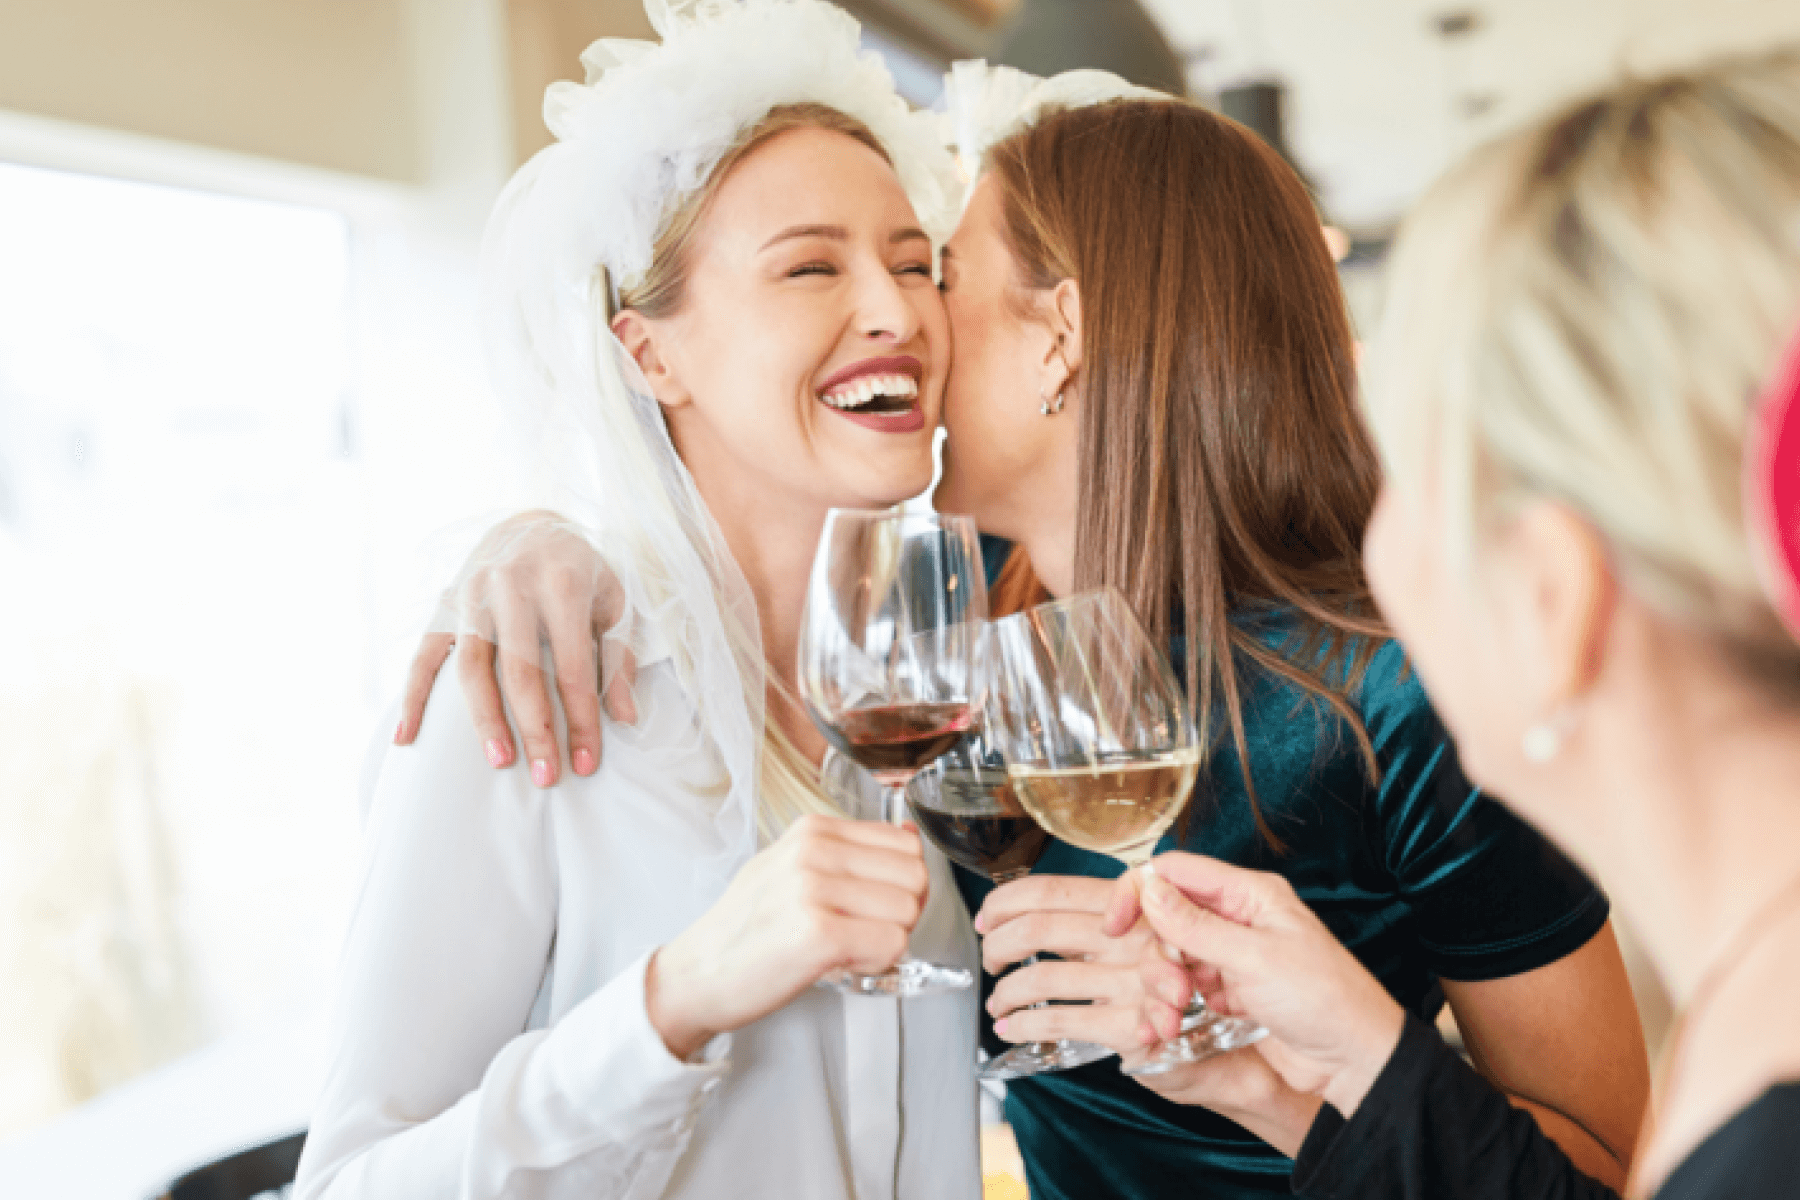 Two women, one wearing a white veil, embrace while clinking wine glasses.